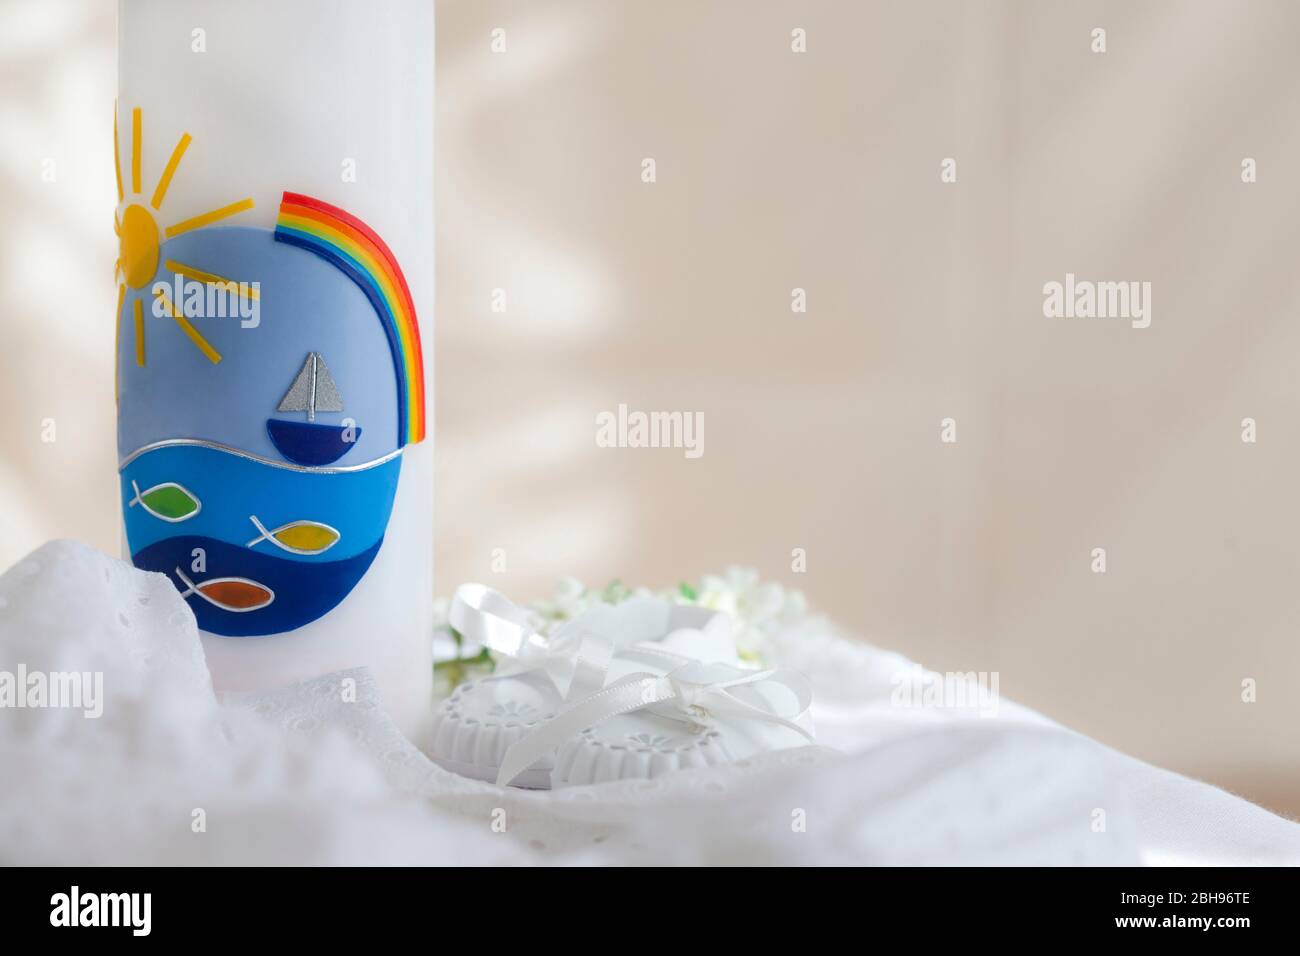 Christening candle with fish, ship and rainbow motif, christening gown and white baby shoes Stock Photo